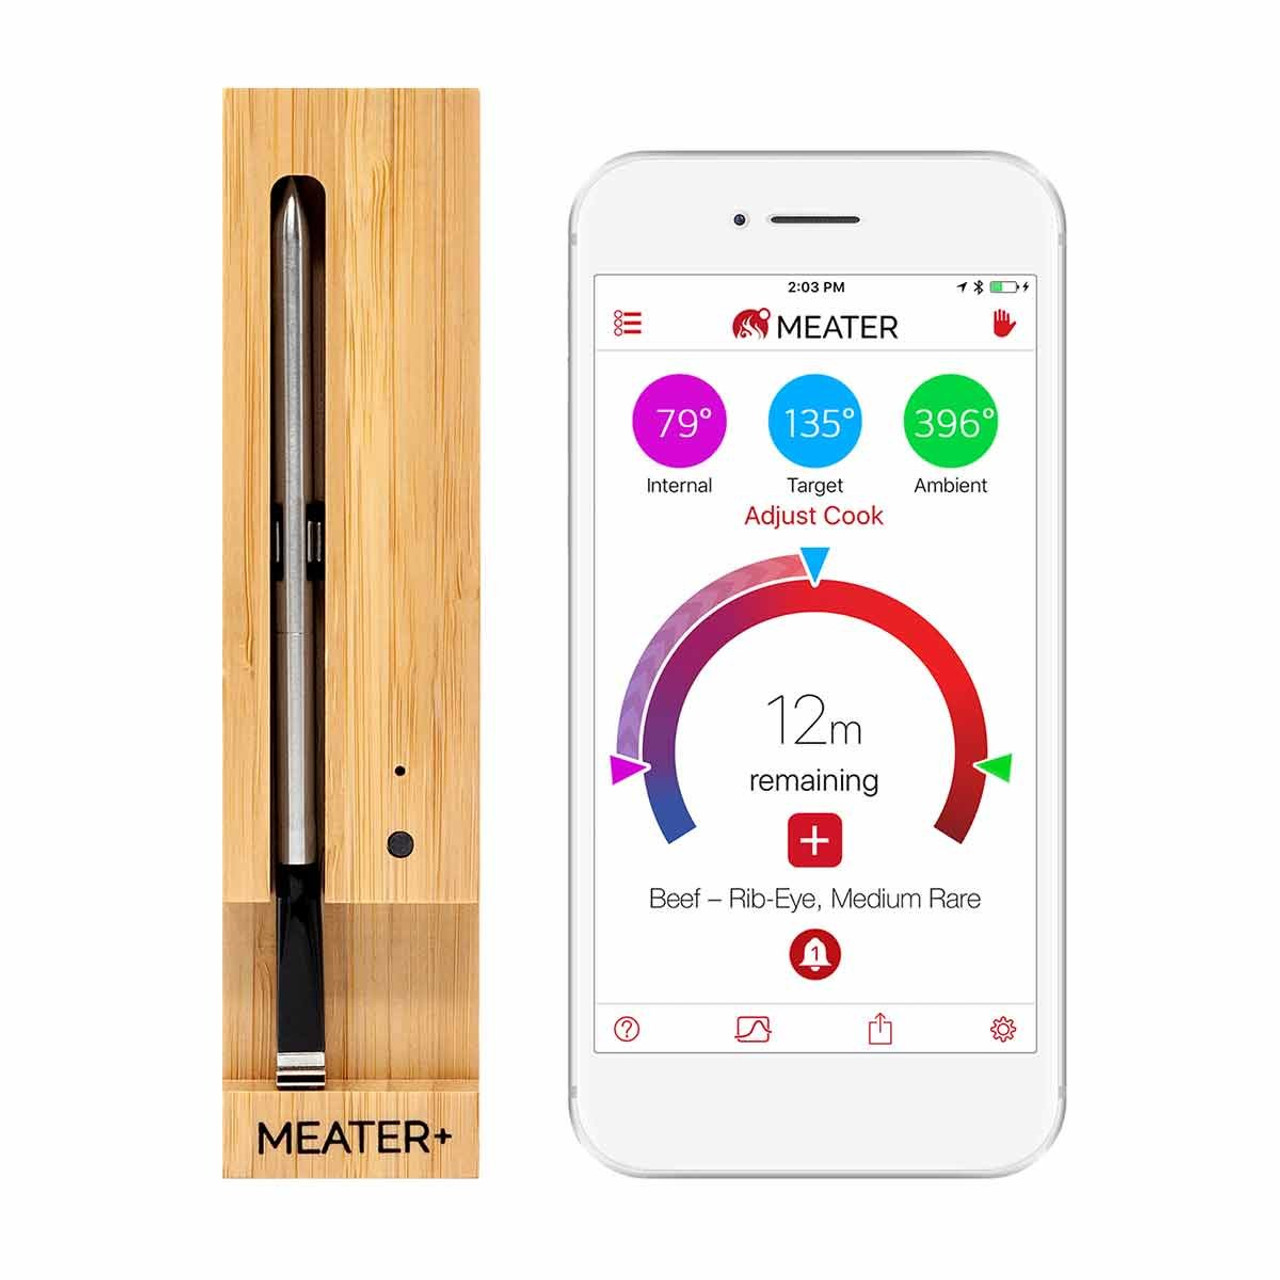 Save $22 on the Meater Plus Thermometer That'll Ping You When Food